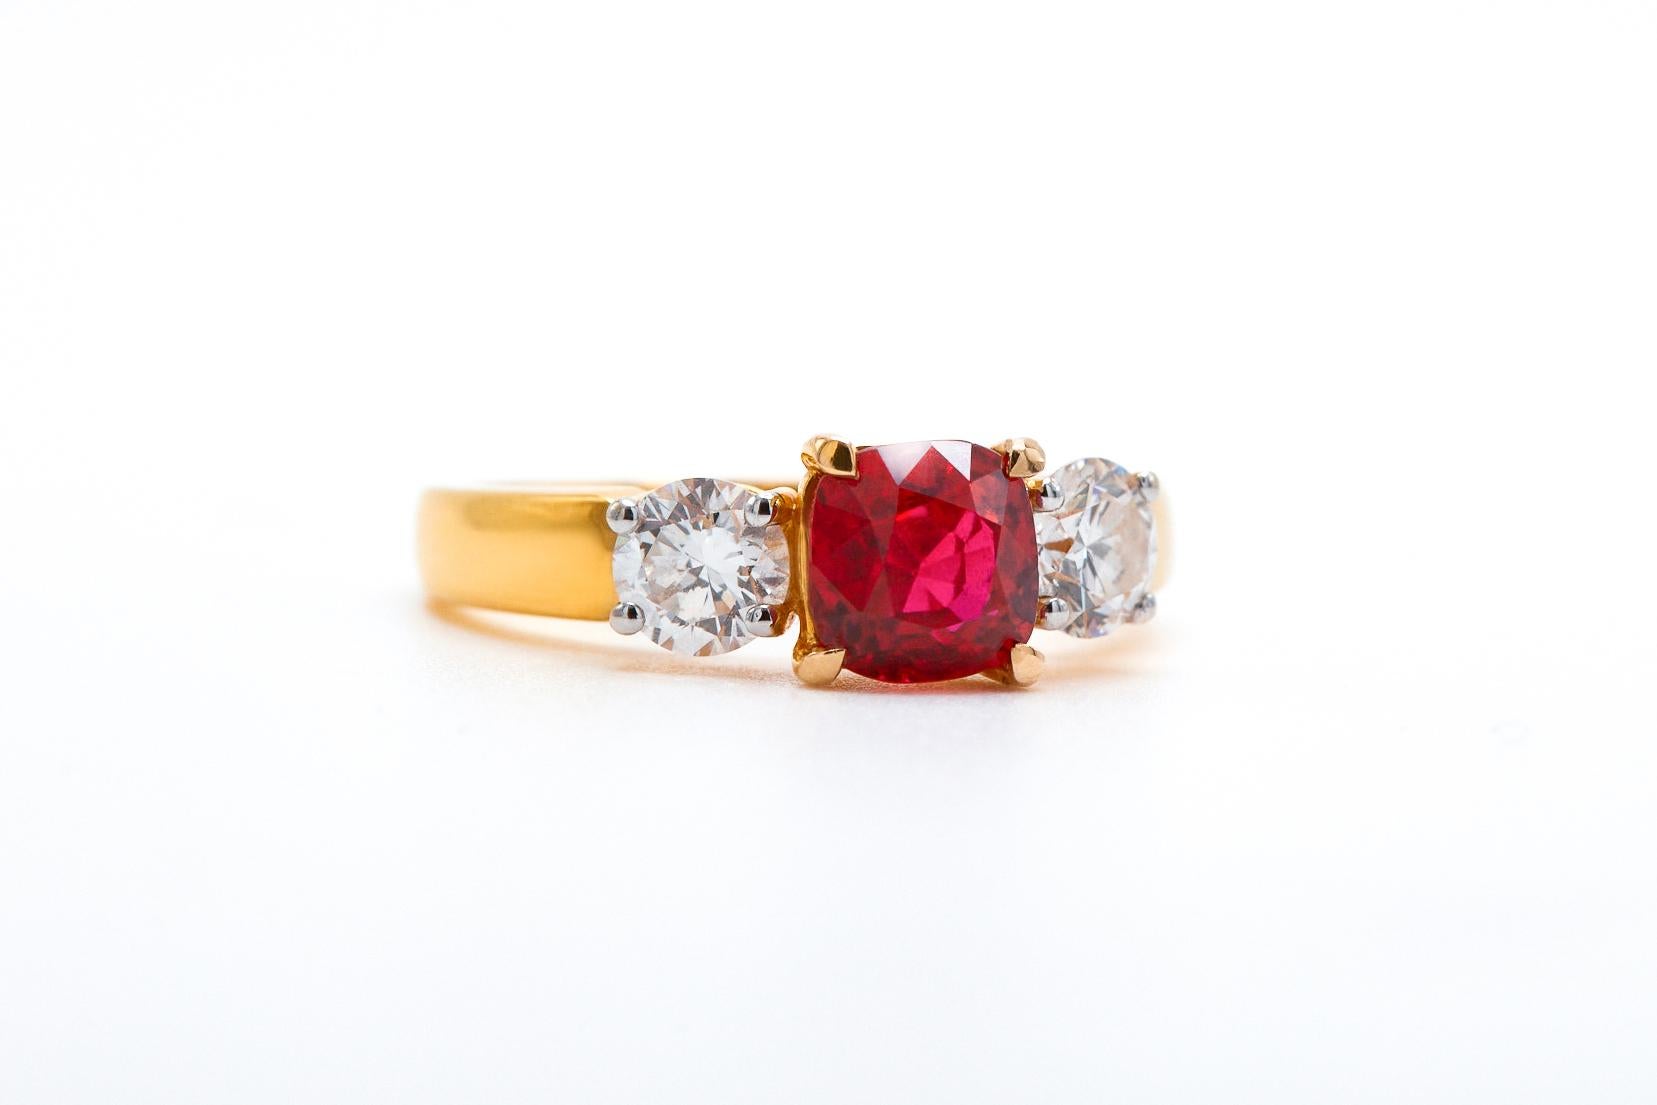 18K YELLOW GOLD 
2 IF, D COLOR GIA CERTIFIED DIAMONDS  0.83 CARATS
1 NO-HEAT PIGEON BLOOD BURMESE RUBY  1.72 CARATS
GUBELIN LAB CERTIFIED  PIGEON BLOOD RED

Introducing our mesmerizing 1.72 carat Burmese Cushion Shaped Ruby Ring, embodying boldness